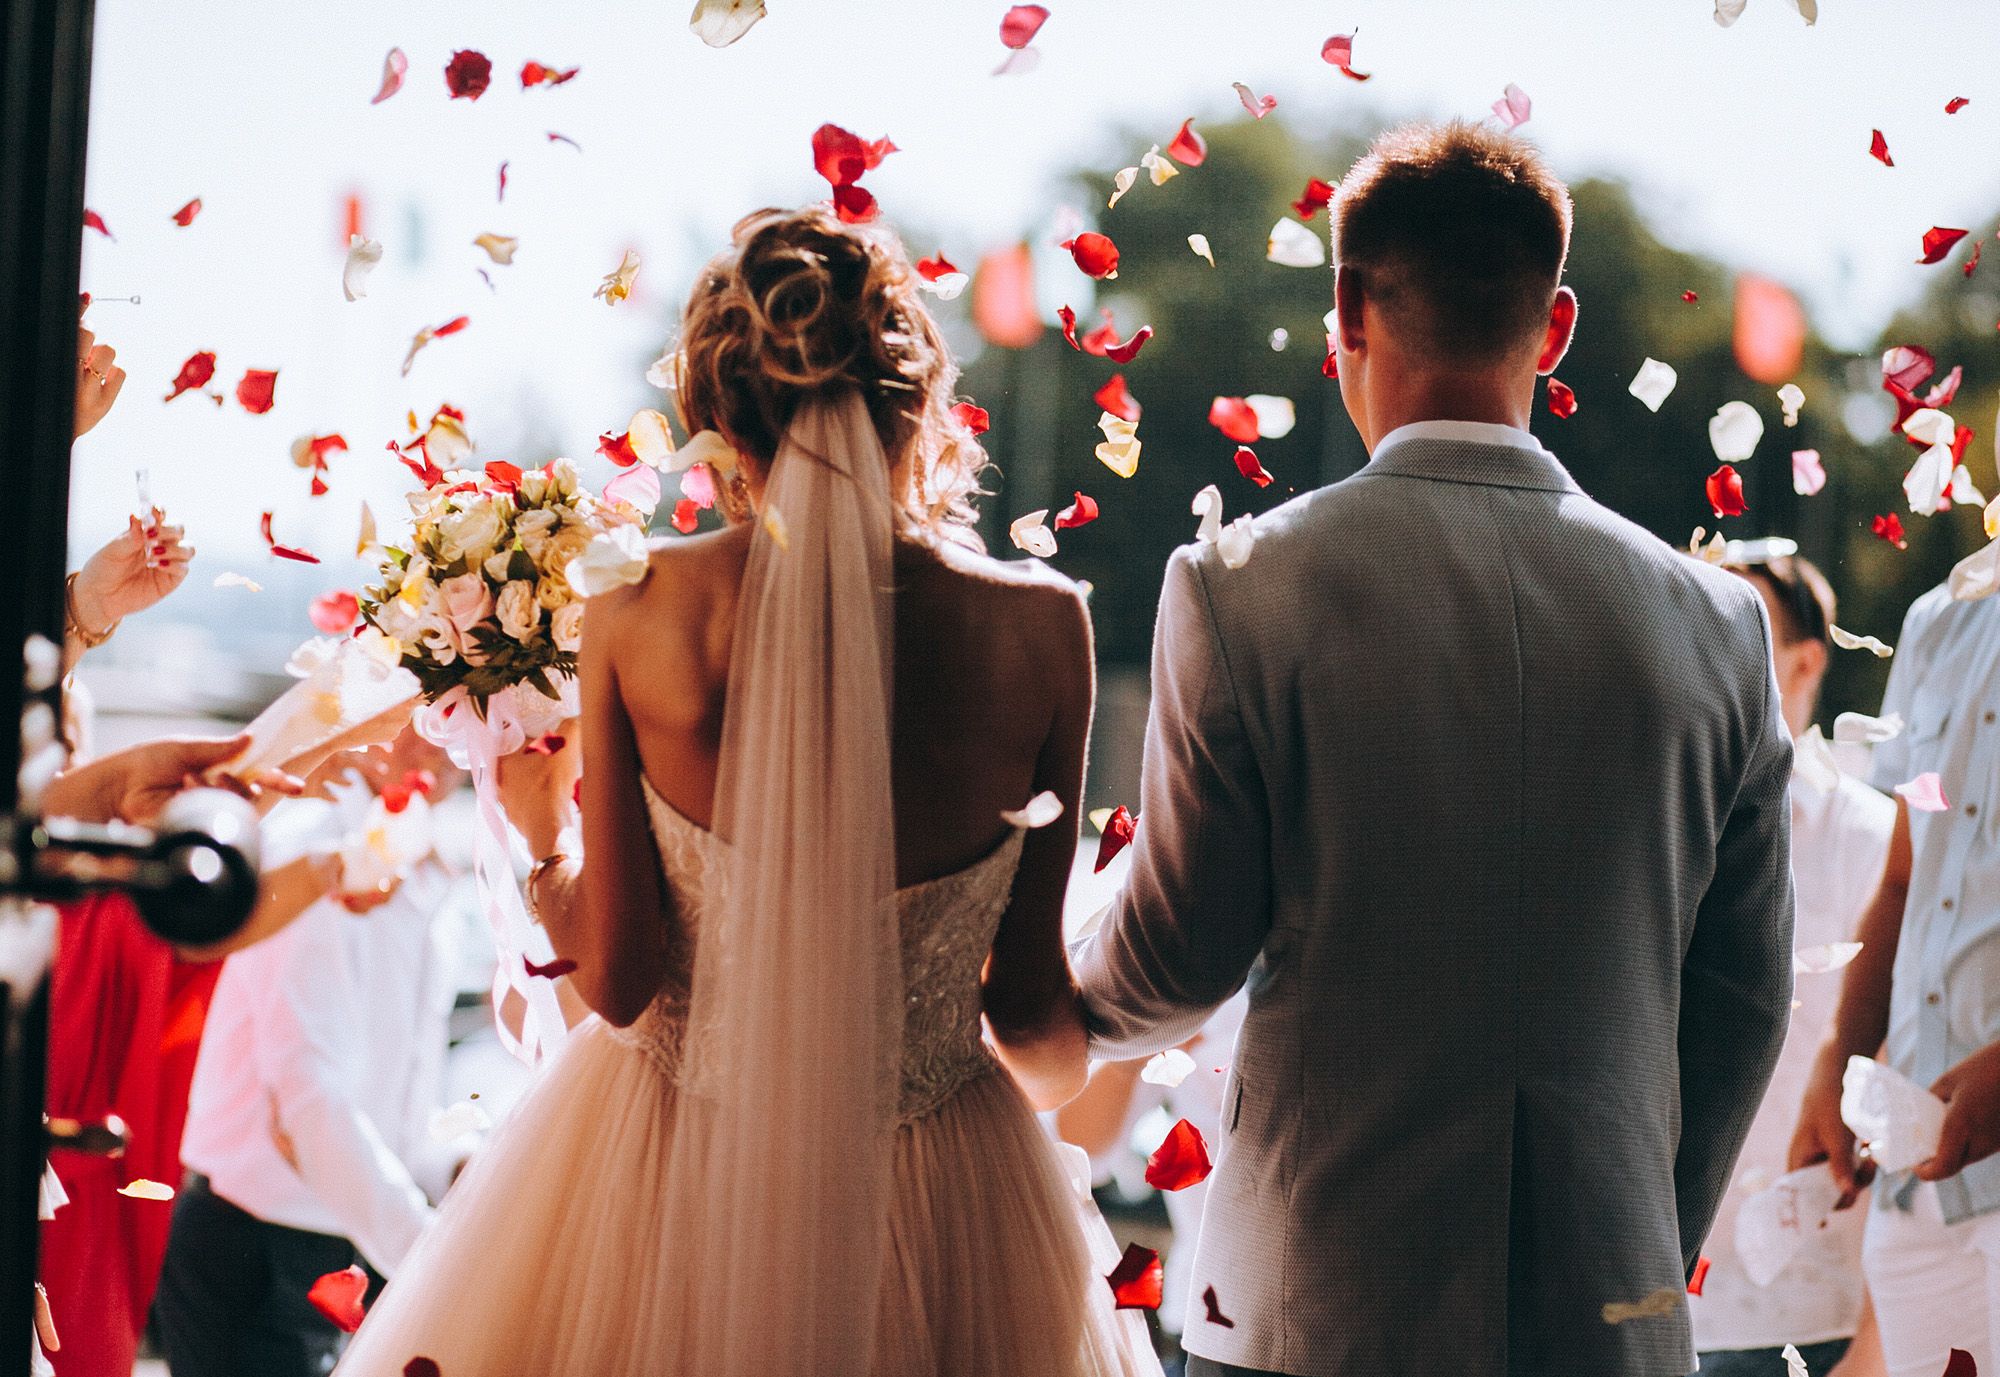 young couple in love.Wedding photo.Rose petals over a couple in love.Wedding ceremony with flowers